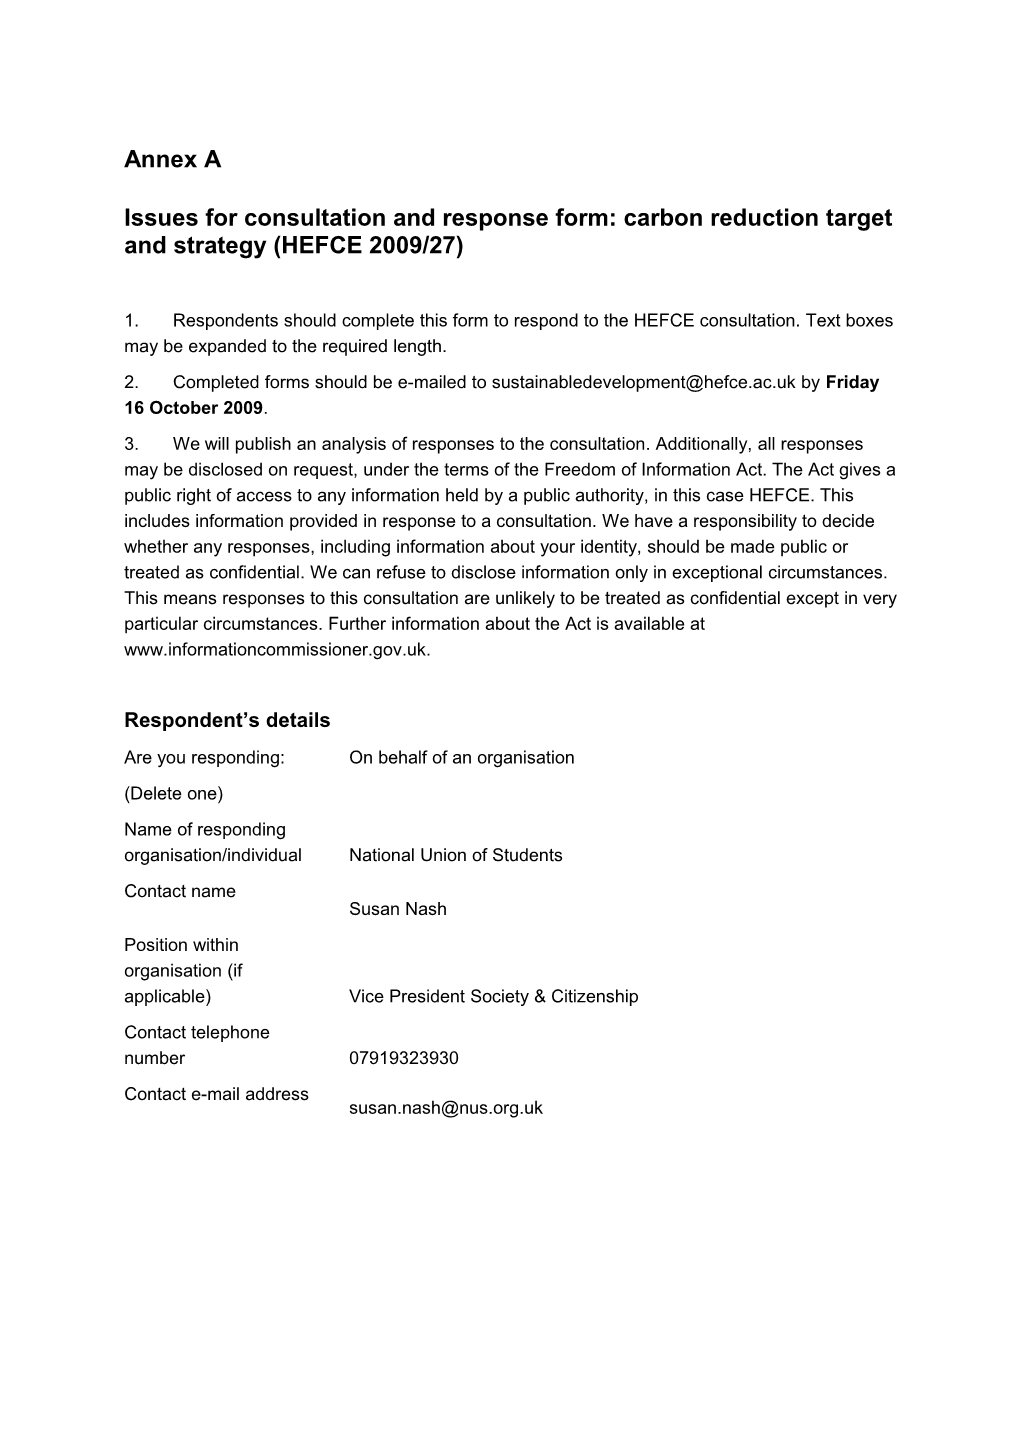 Issues for Consultation and Response Form: Carbon Reduction Target and Strategy (HEFCE 2009/27)